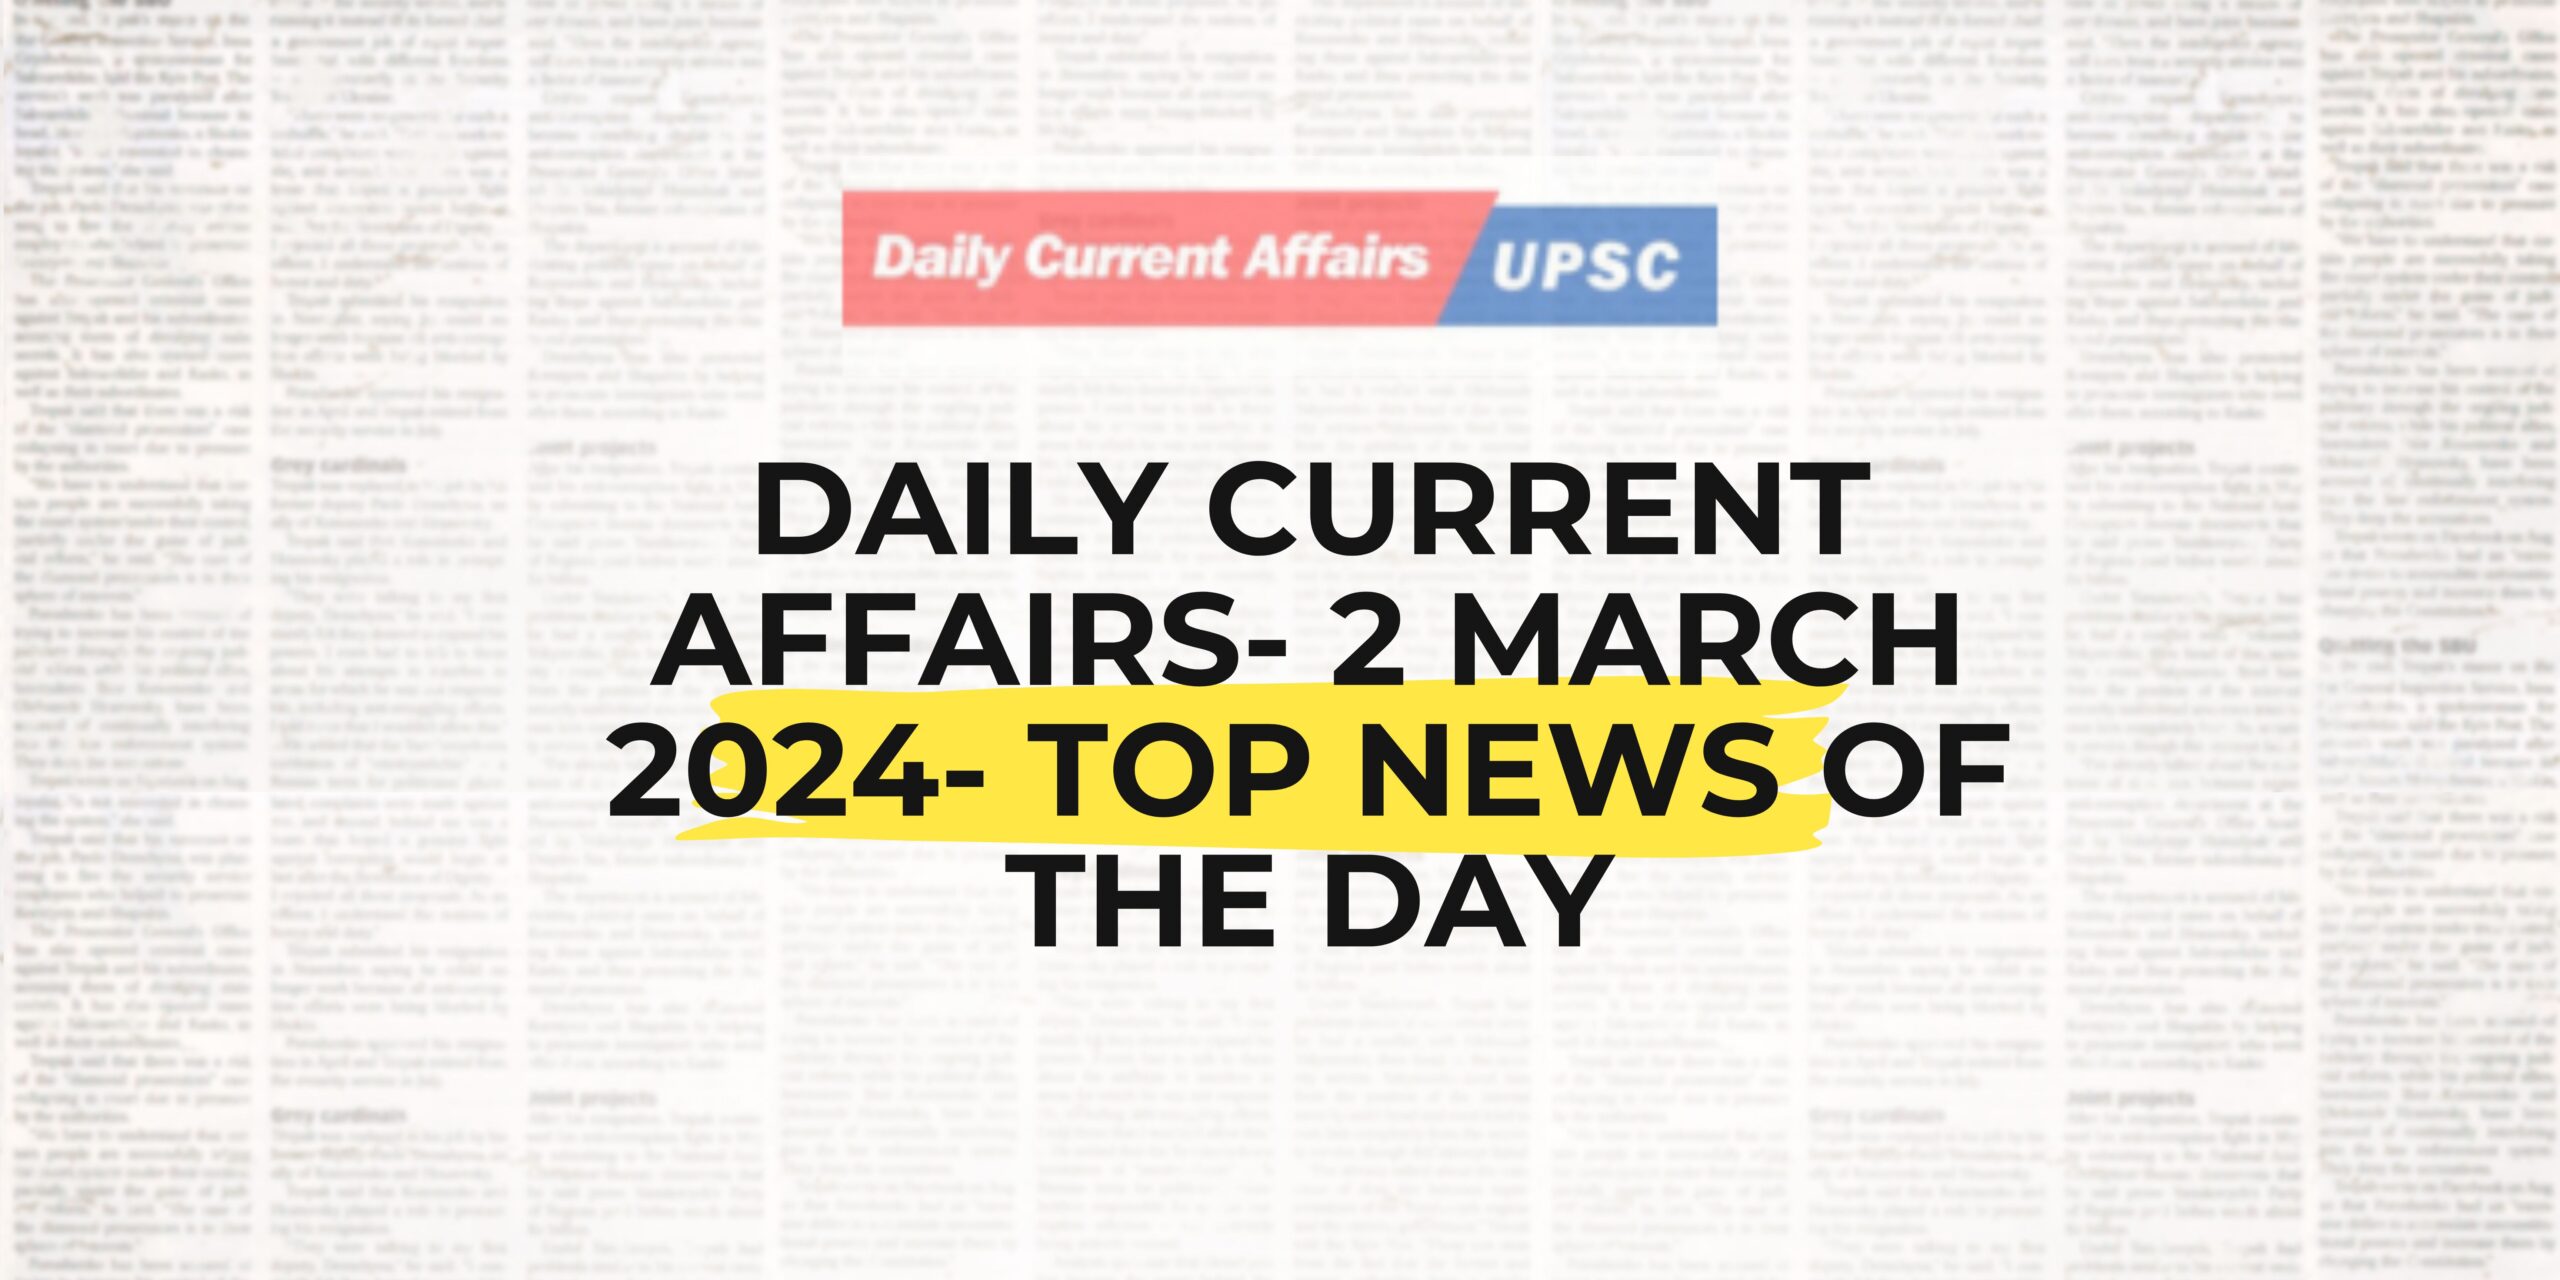 Daily Current Affairs 2 March 2024- Top News Of The Day